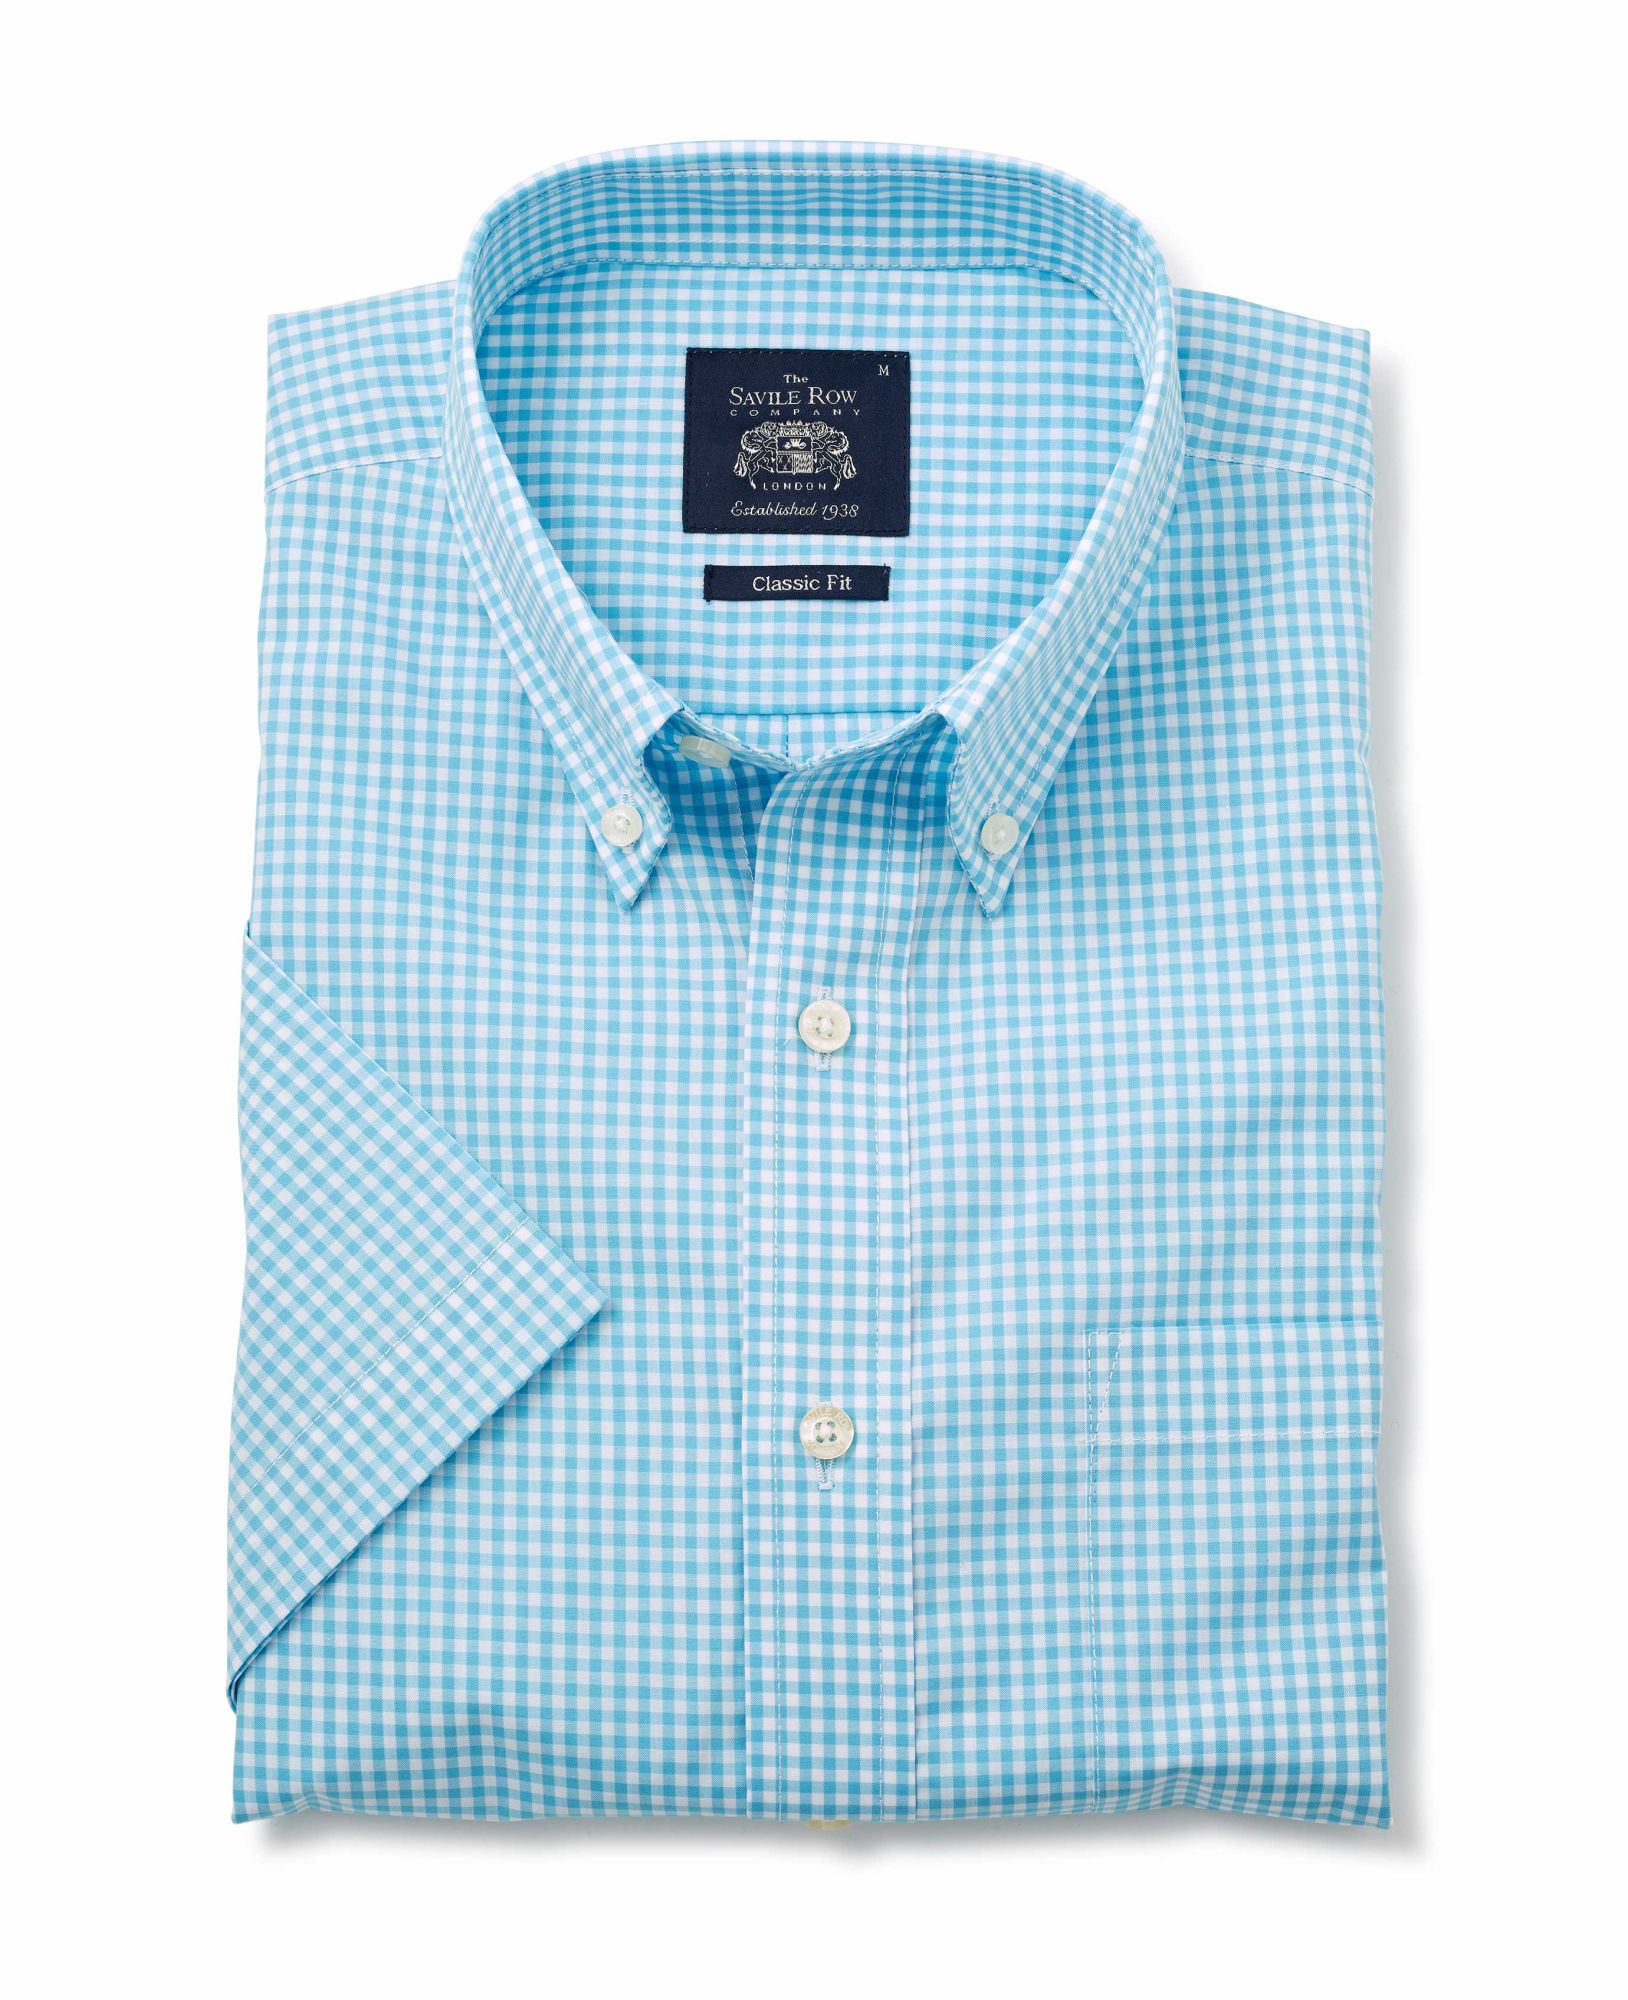 Turquoise Gingham Check Classic Fit Short Sleeve Shirt S